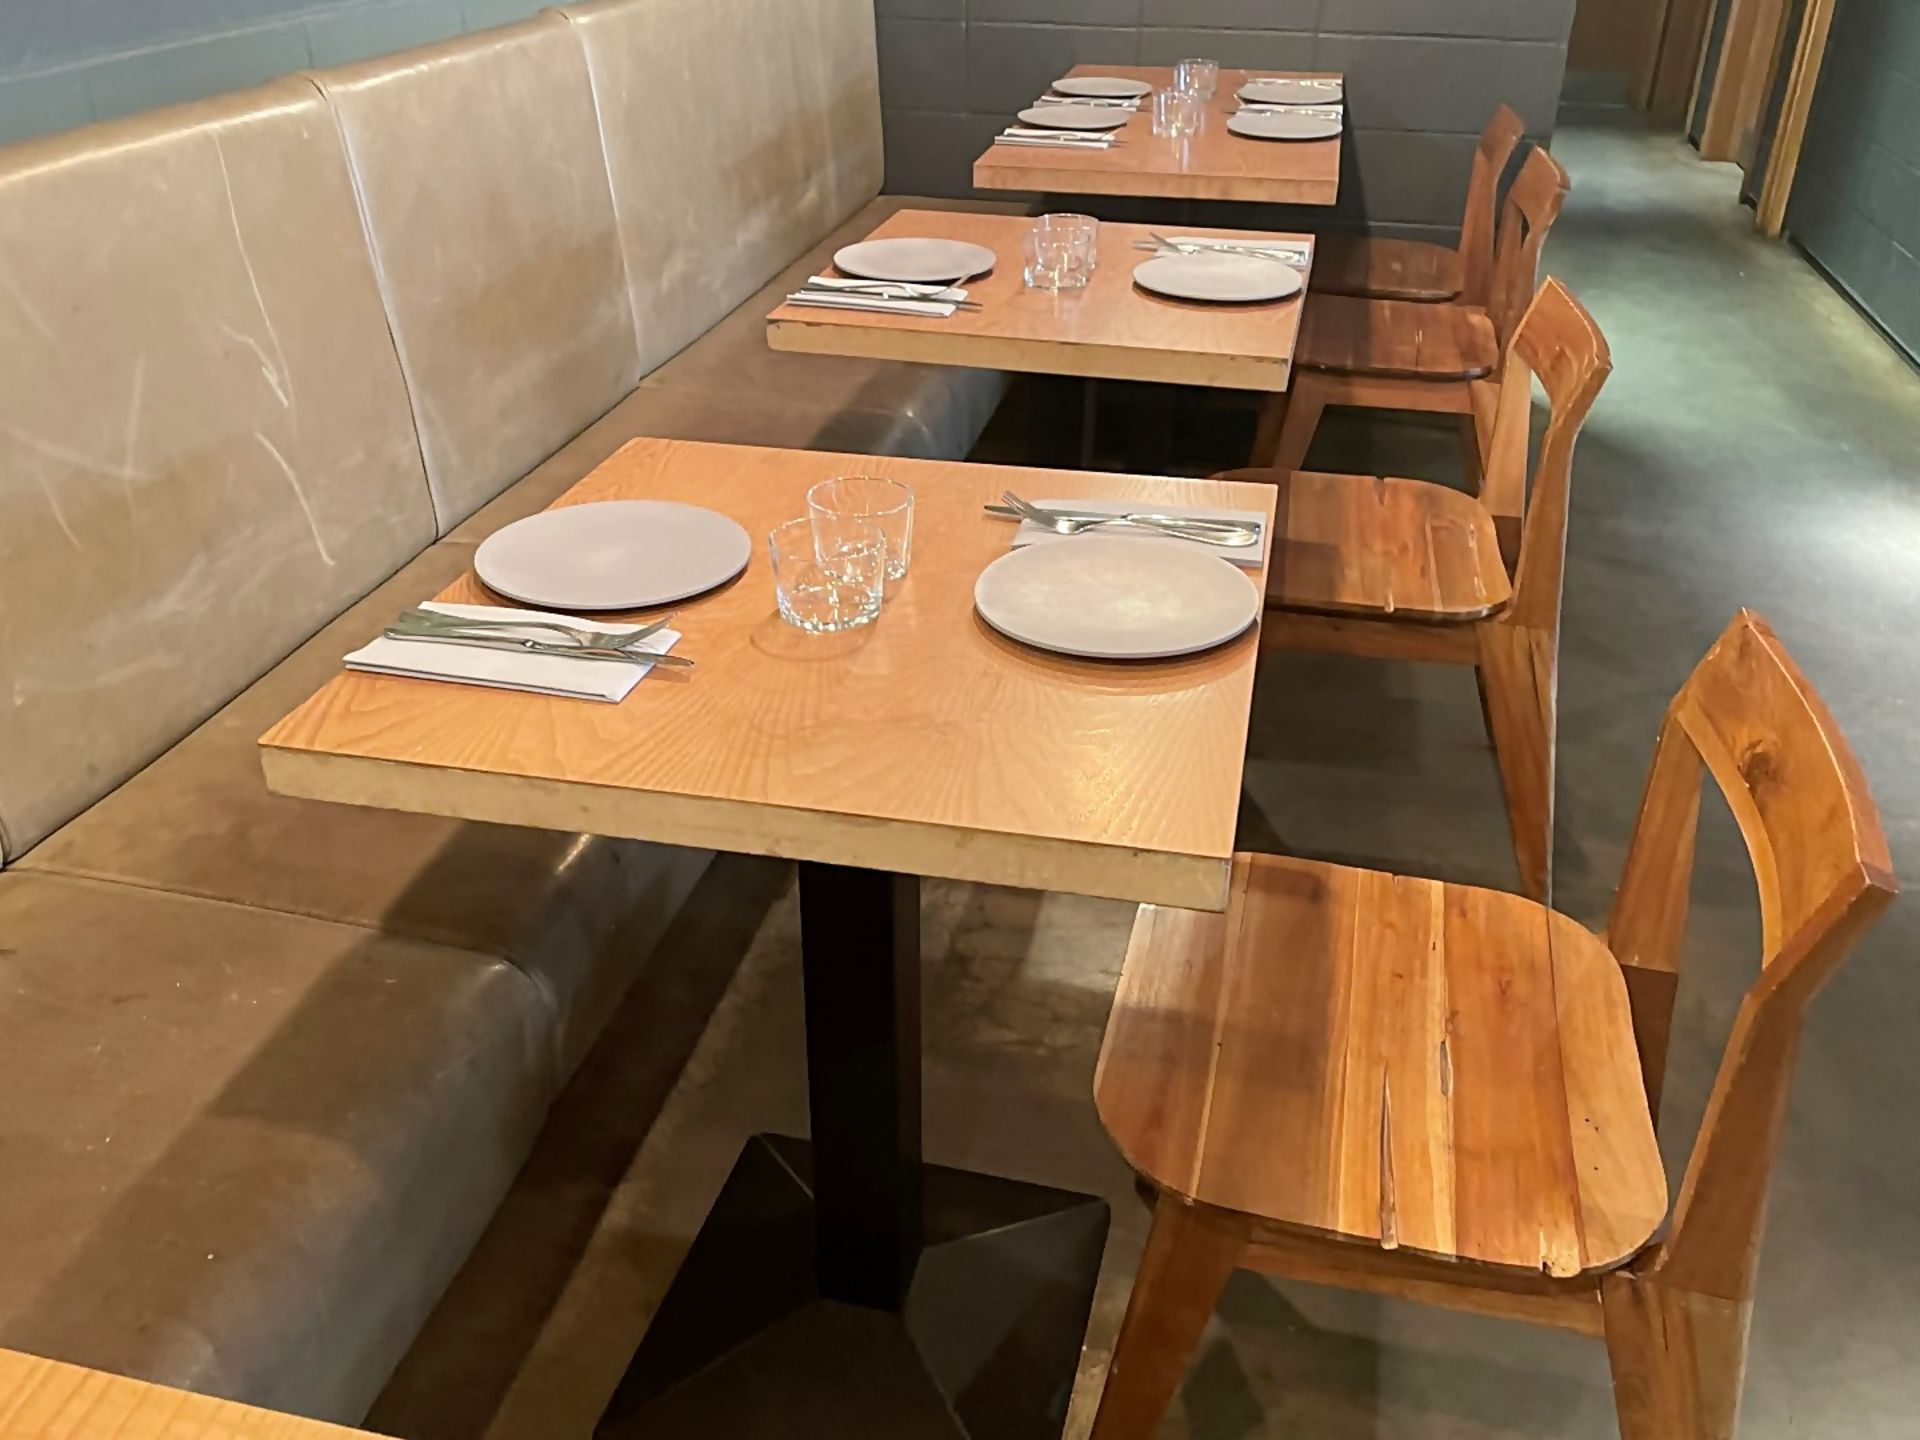 4 x Square Bistro Tables Featuring Wooden Tops And Sturdy Metal Bases - Dimensions To Follow - - Image 2 of 6